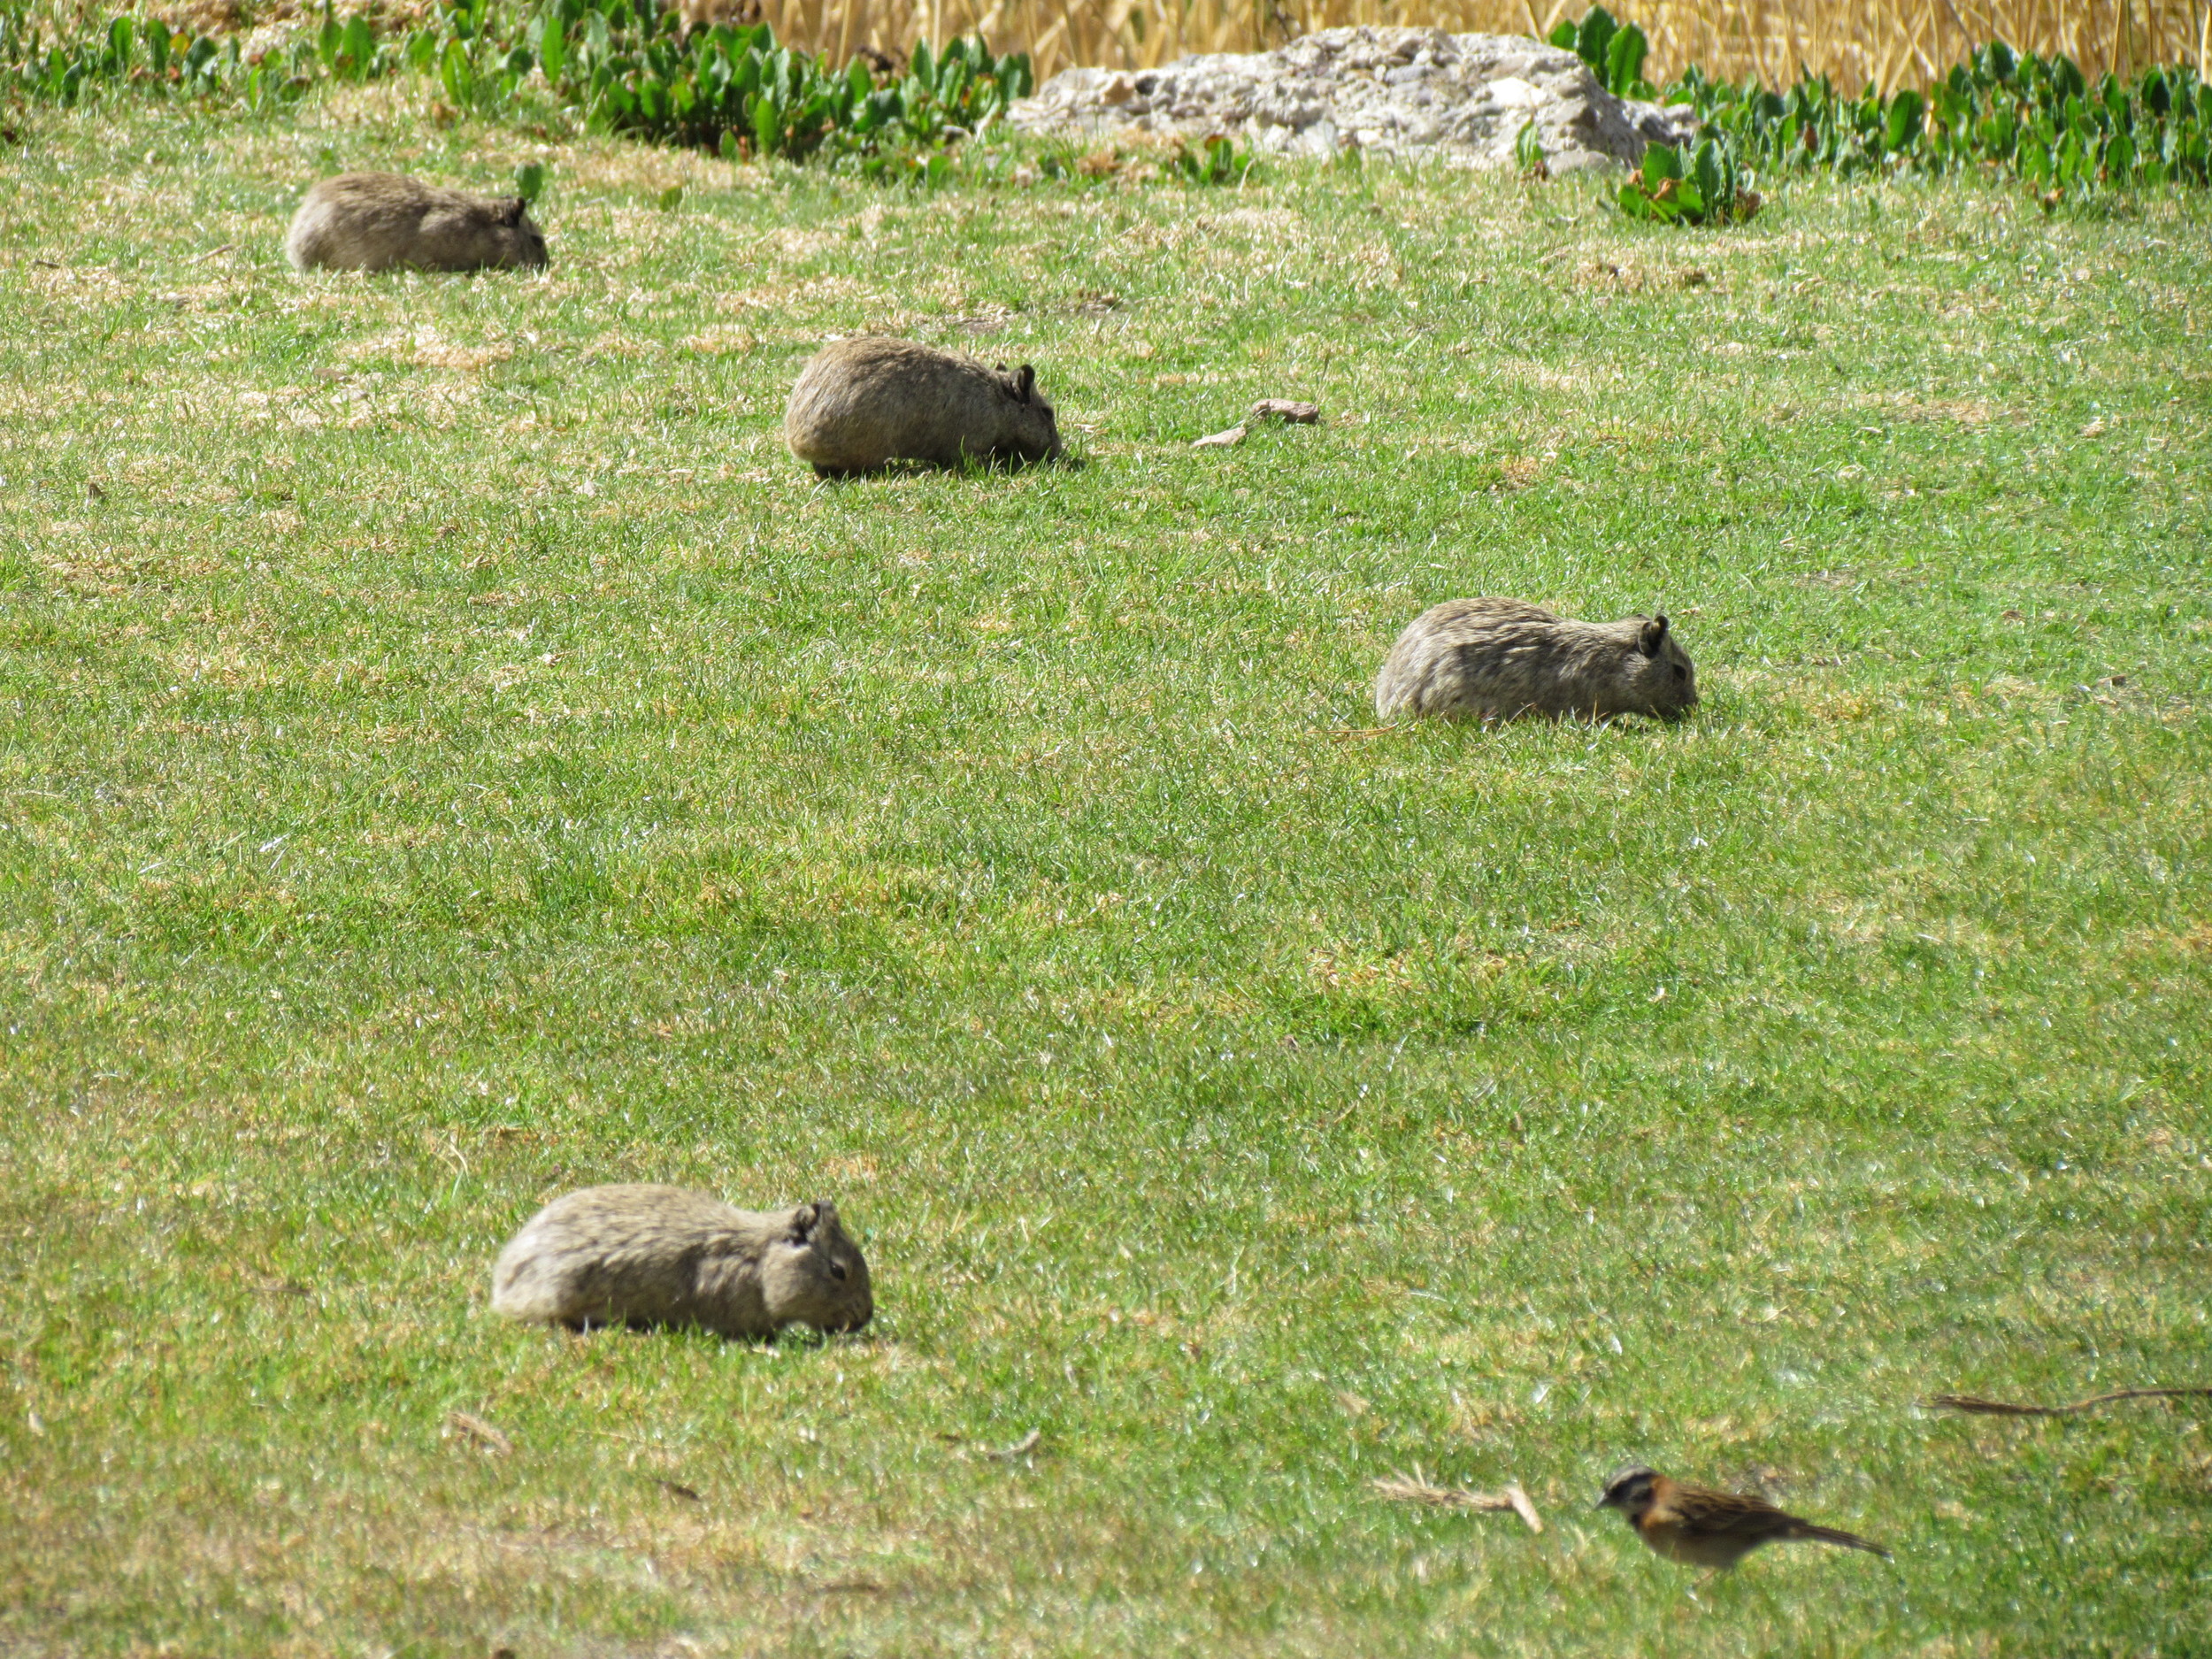 And then we had a big group of Guinea pigs living in the garden as well